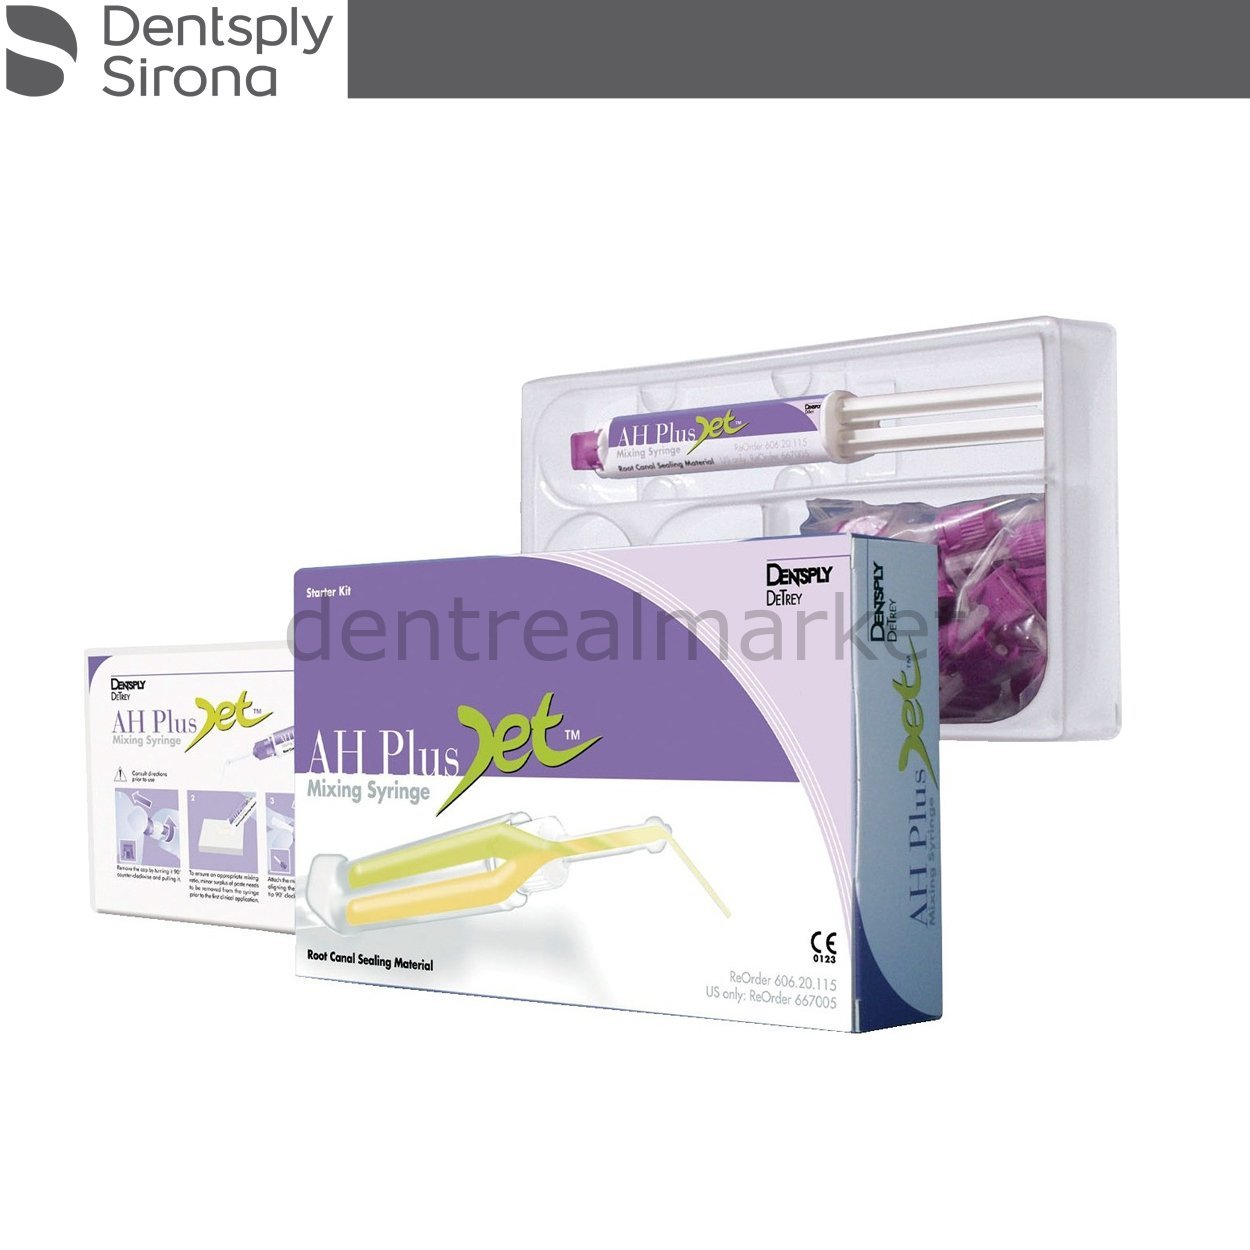 DentrealStore - Dentsply-Sirona Ah Plus Jet Channel Filling Material Set